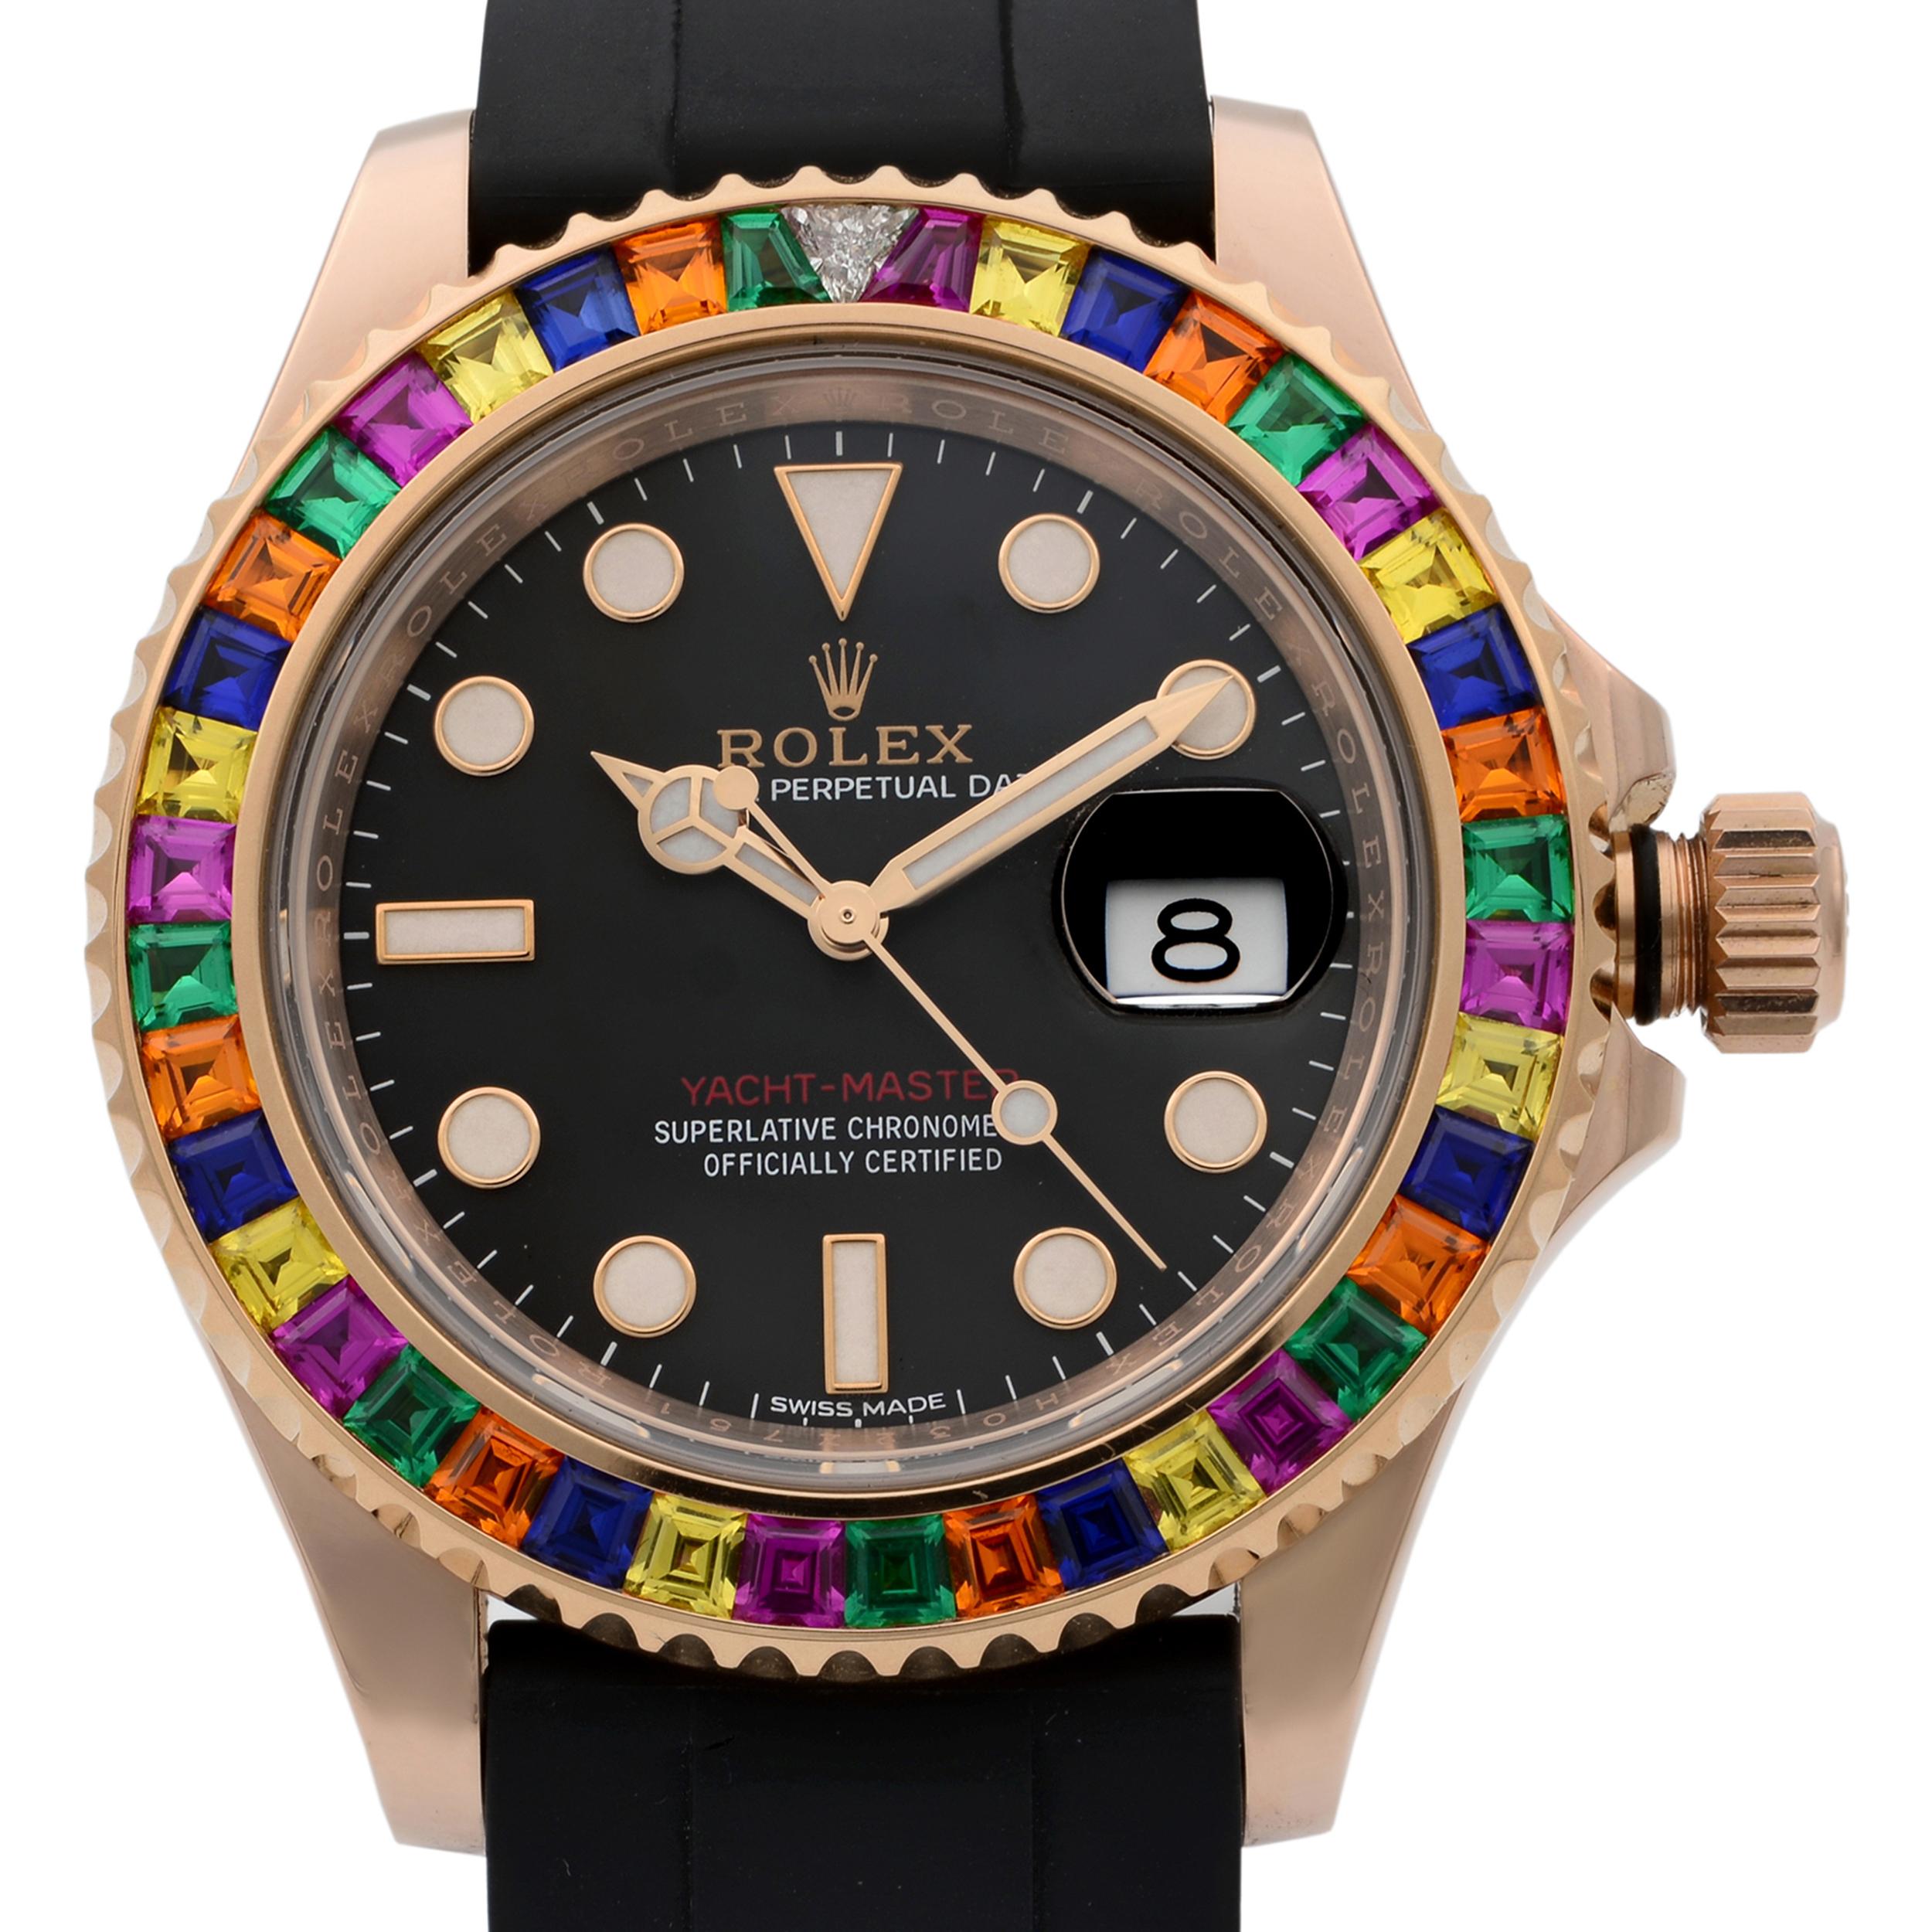 This pre-owned Rolex yacht master 116655 is a beautiful men's timepiece that is powered by a mechanical (automatic) movement which is cased in a rose gold case. It has a round shape face, date indicator dial, and has hand sticks & dots style